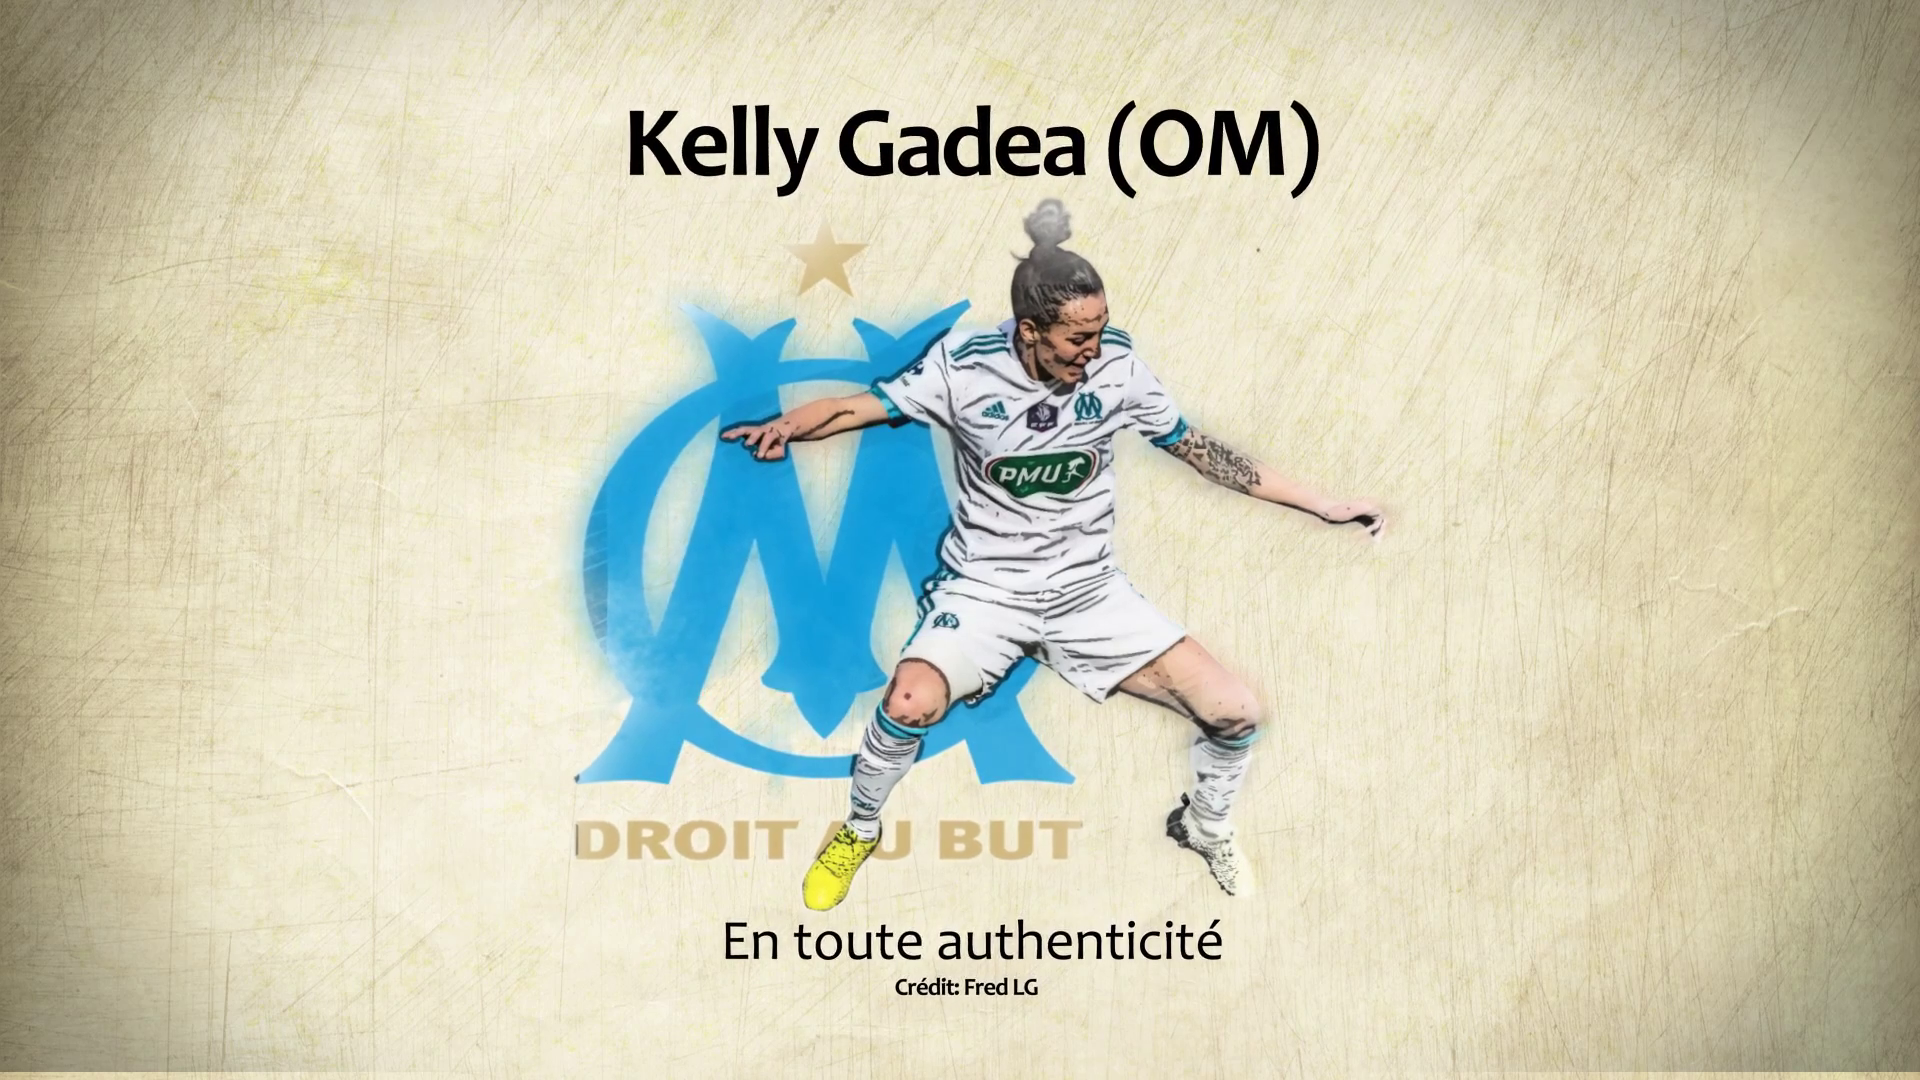 Kelly Gadea (OM): "It's in hard times that we build ourselves"